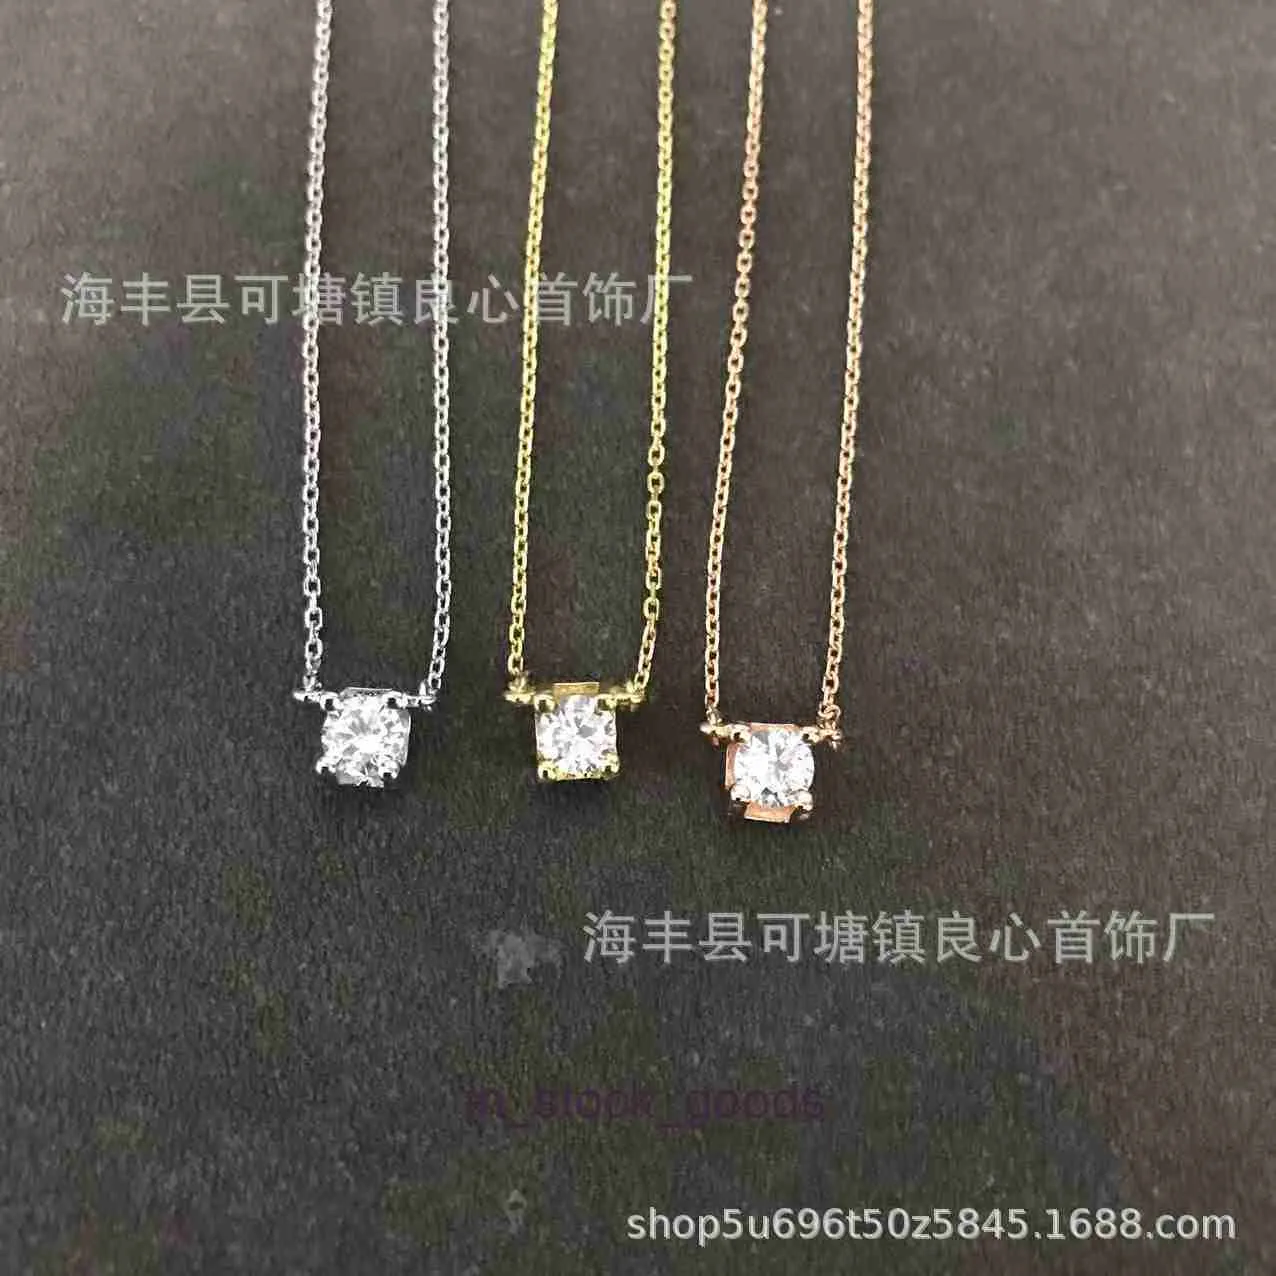 High end designer necklace carter Small Bull Necklace with Diamond Classic Bull Head Diamond Single Diamond Pendant Necklace for Versatile Simple and Luxury Style